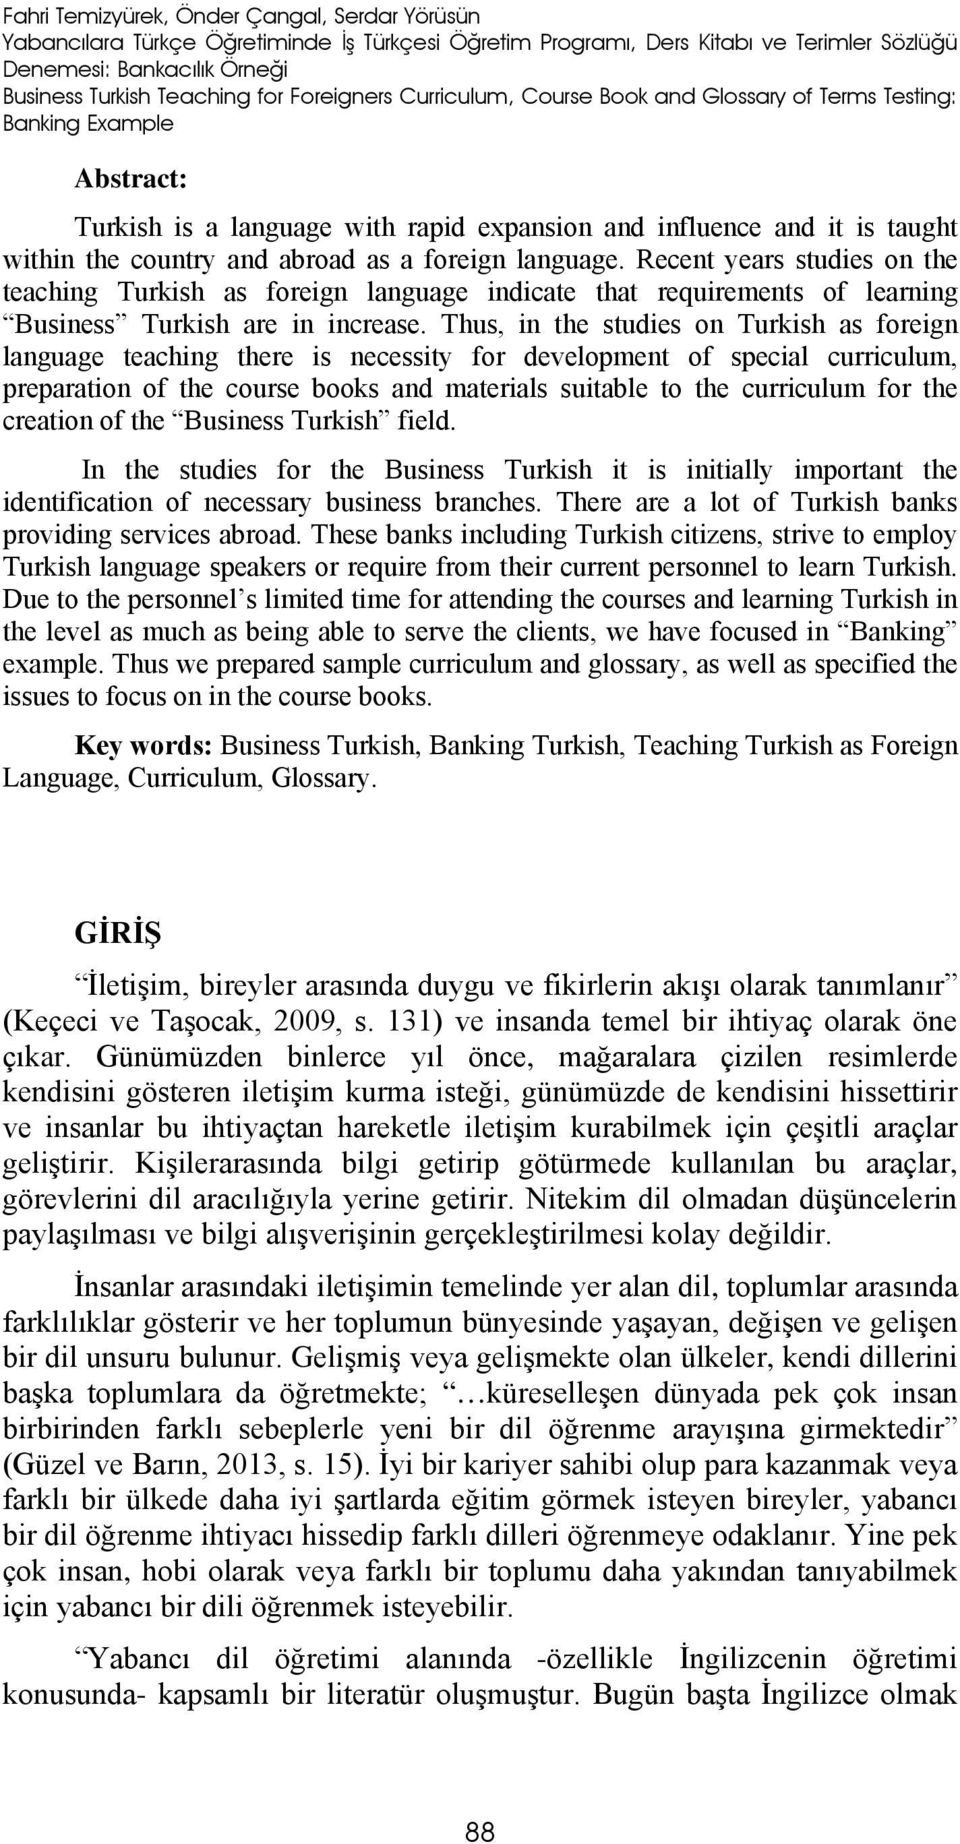 a foreign language. Recent years studies on the teaching Turkish as foreign language indicate that requirements of learning Business Turkish are in increase.